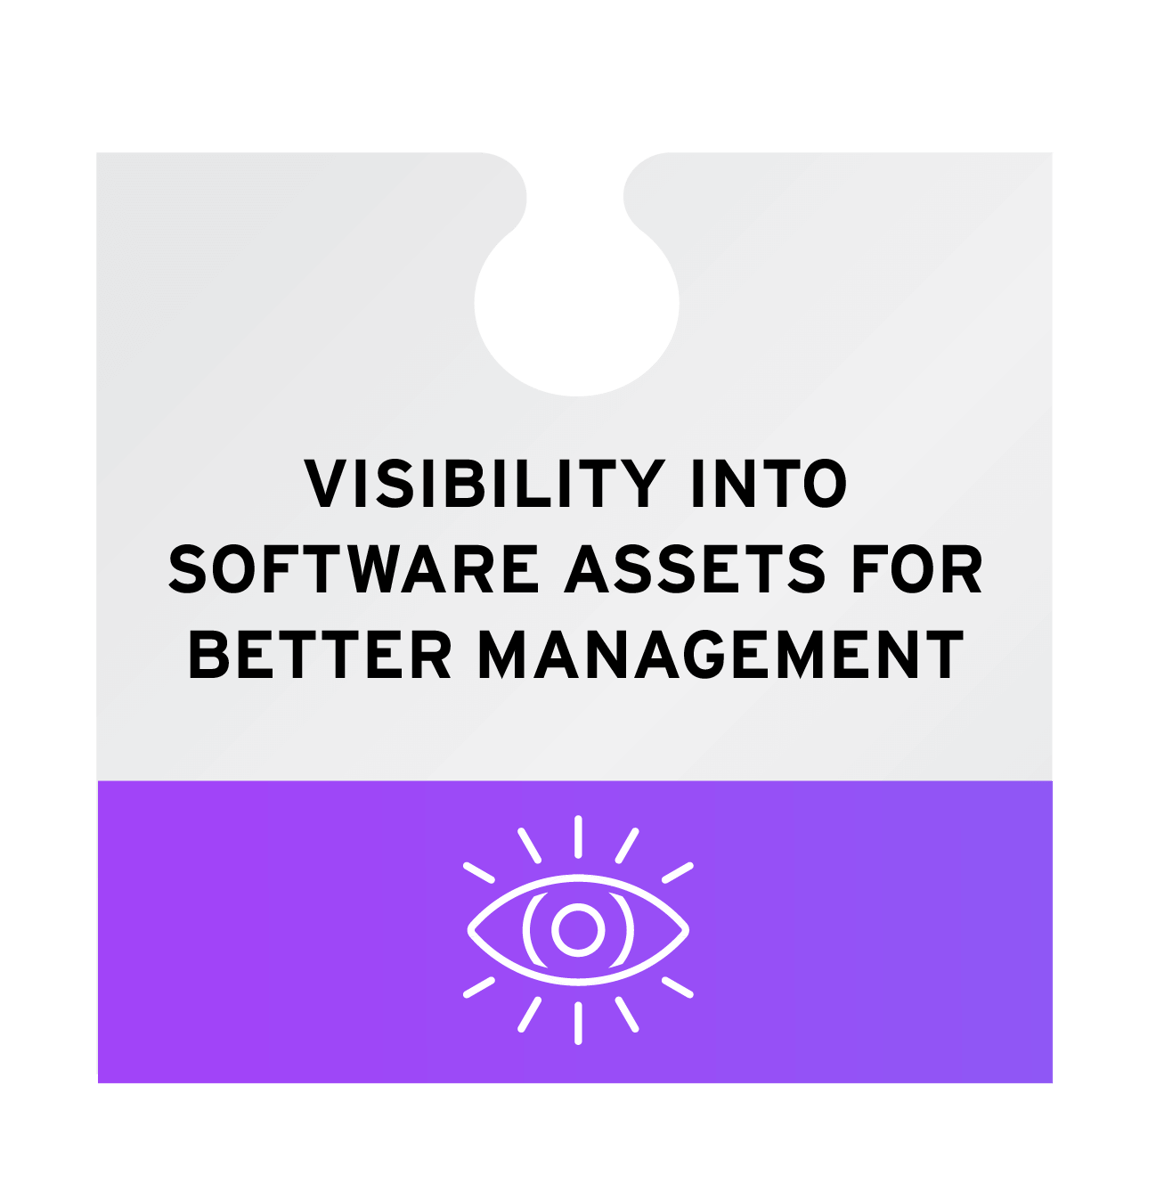 Visibility into software assets for better management